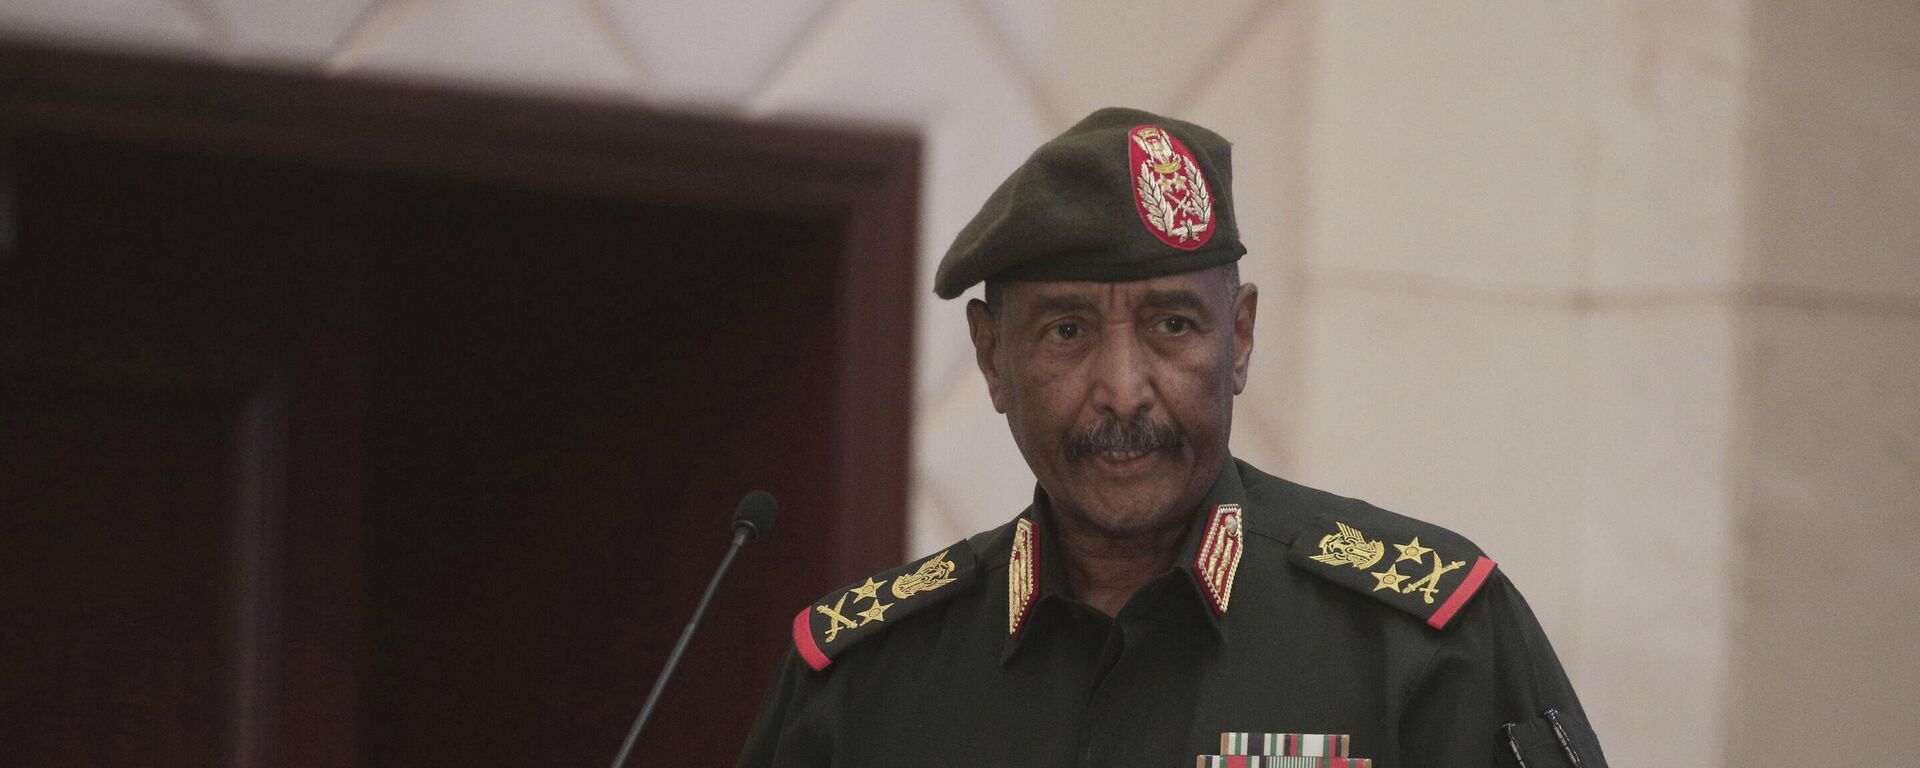 Sudan's Army chief Gen. Abdel-Fattah Burhan speaks following the signature of an initial deal aimed at ending a deep crisis caused by last year's military coup, in Khartoum, Sudan, Dec. 5, 2022 - Sputnik International, 1920, 06.04.2023